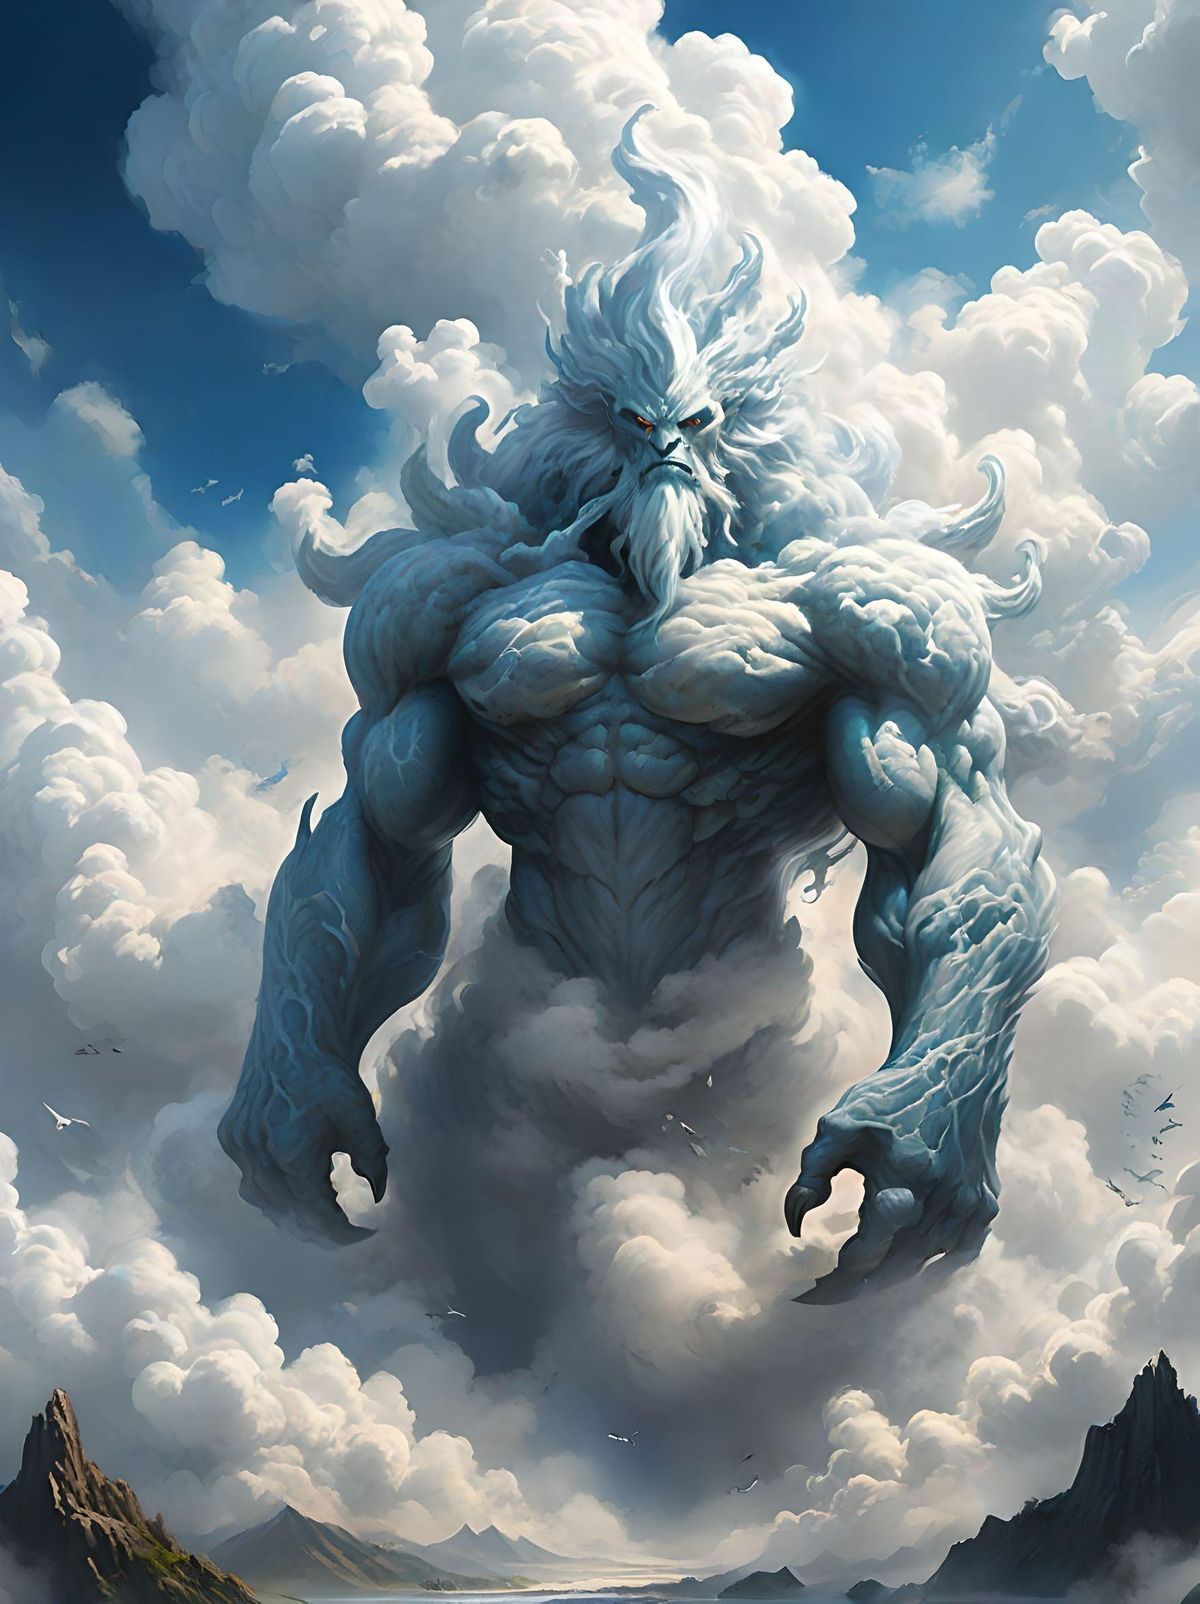 monster from the cloud, a creature cloud giants high above the world,
muscular with light skin and have hair of silver or blue made of clouds,
high and mighty, cloud giants are spread to the winds, encompassing vast
areas of the world, attuned to the magic of their airy domains,
cloud giants are able to turn into mist and create clouds of billowing fog